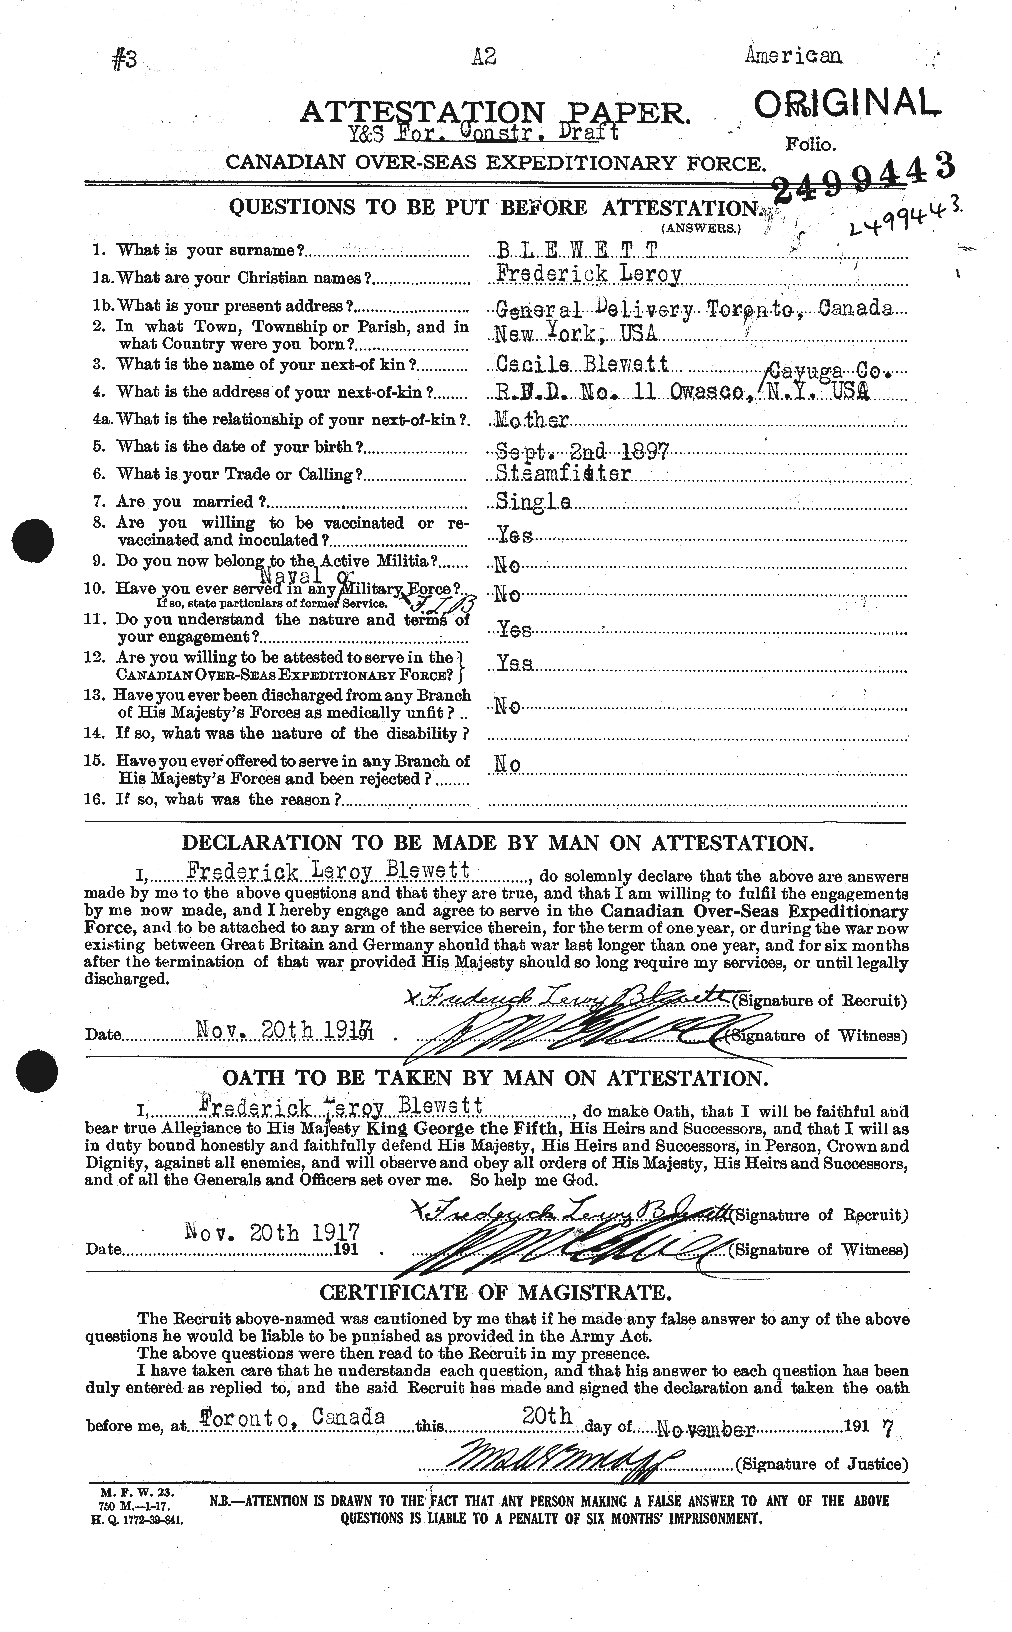 Personnel Records of the First World War - CEF 248031a